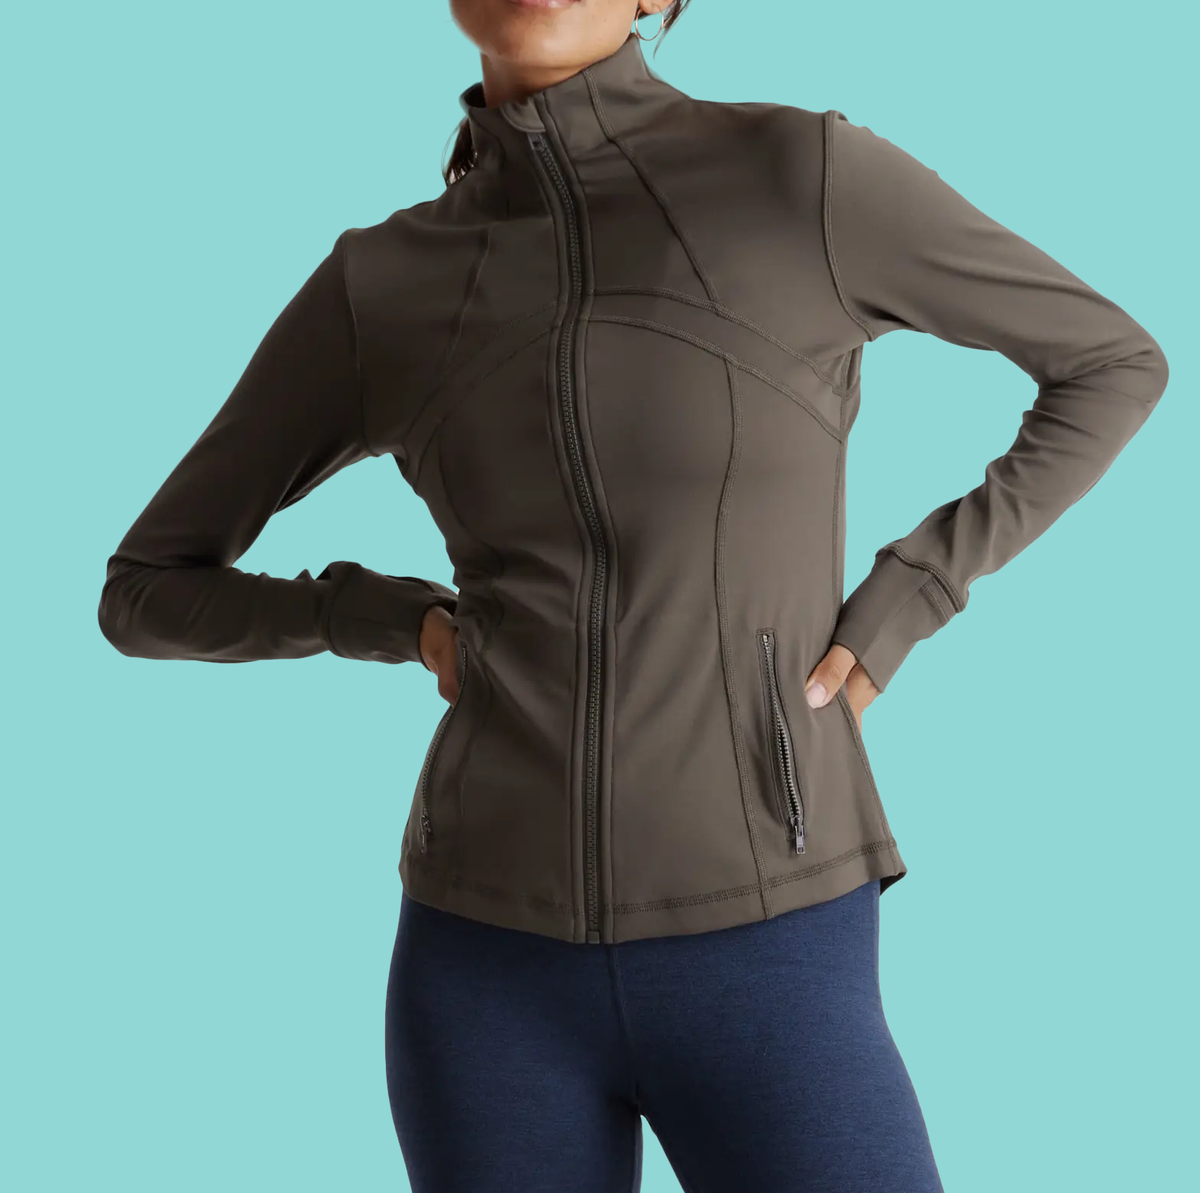 5 workout jackets that take on the wind and rain